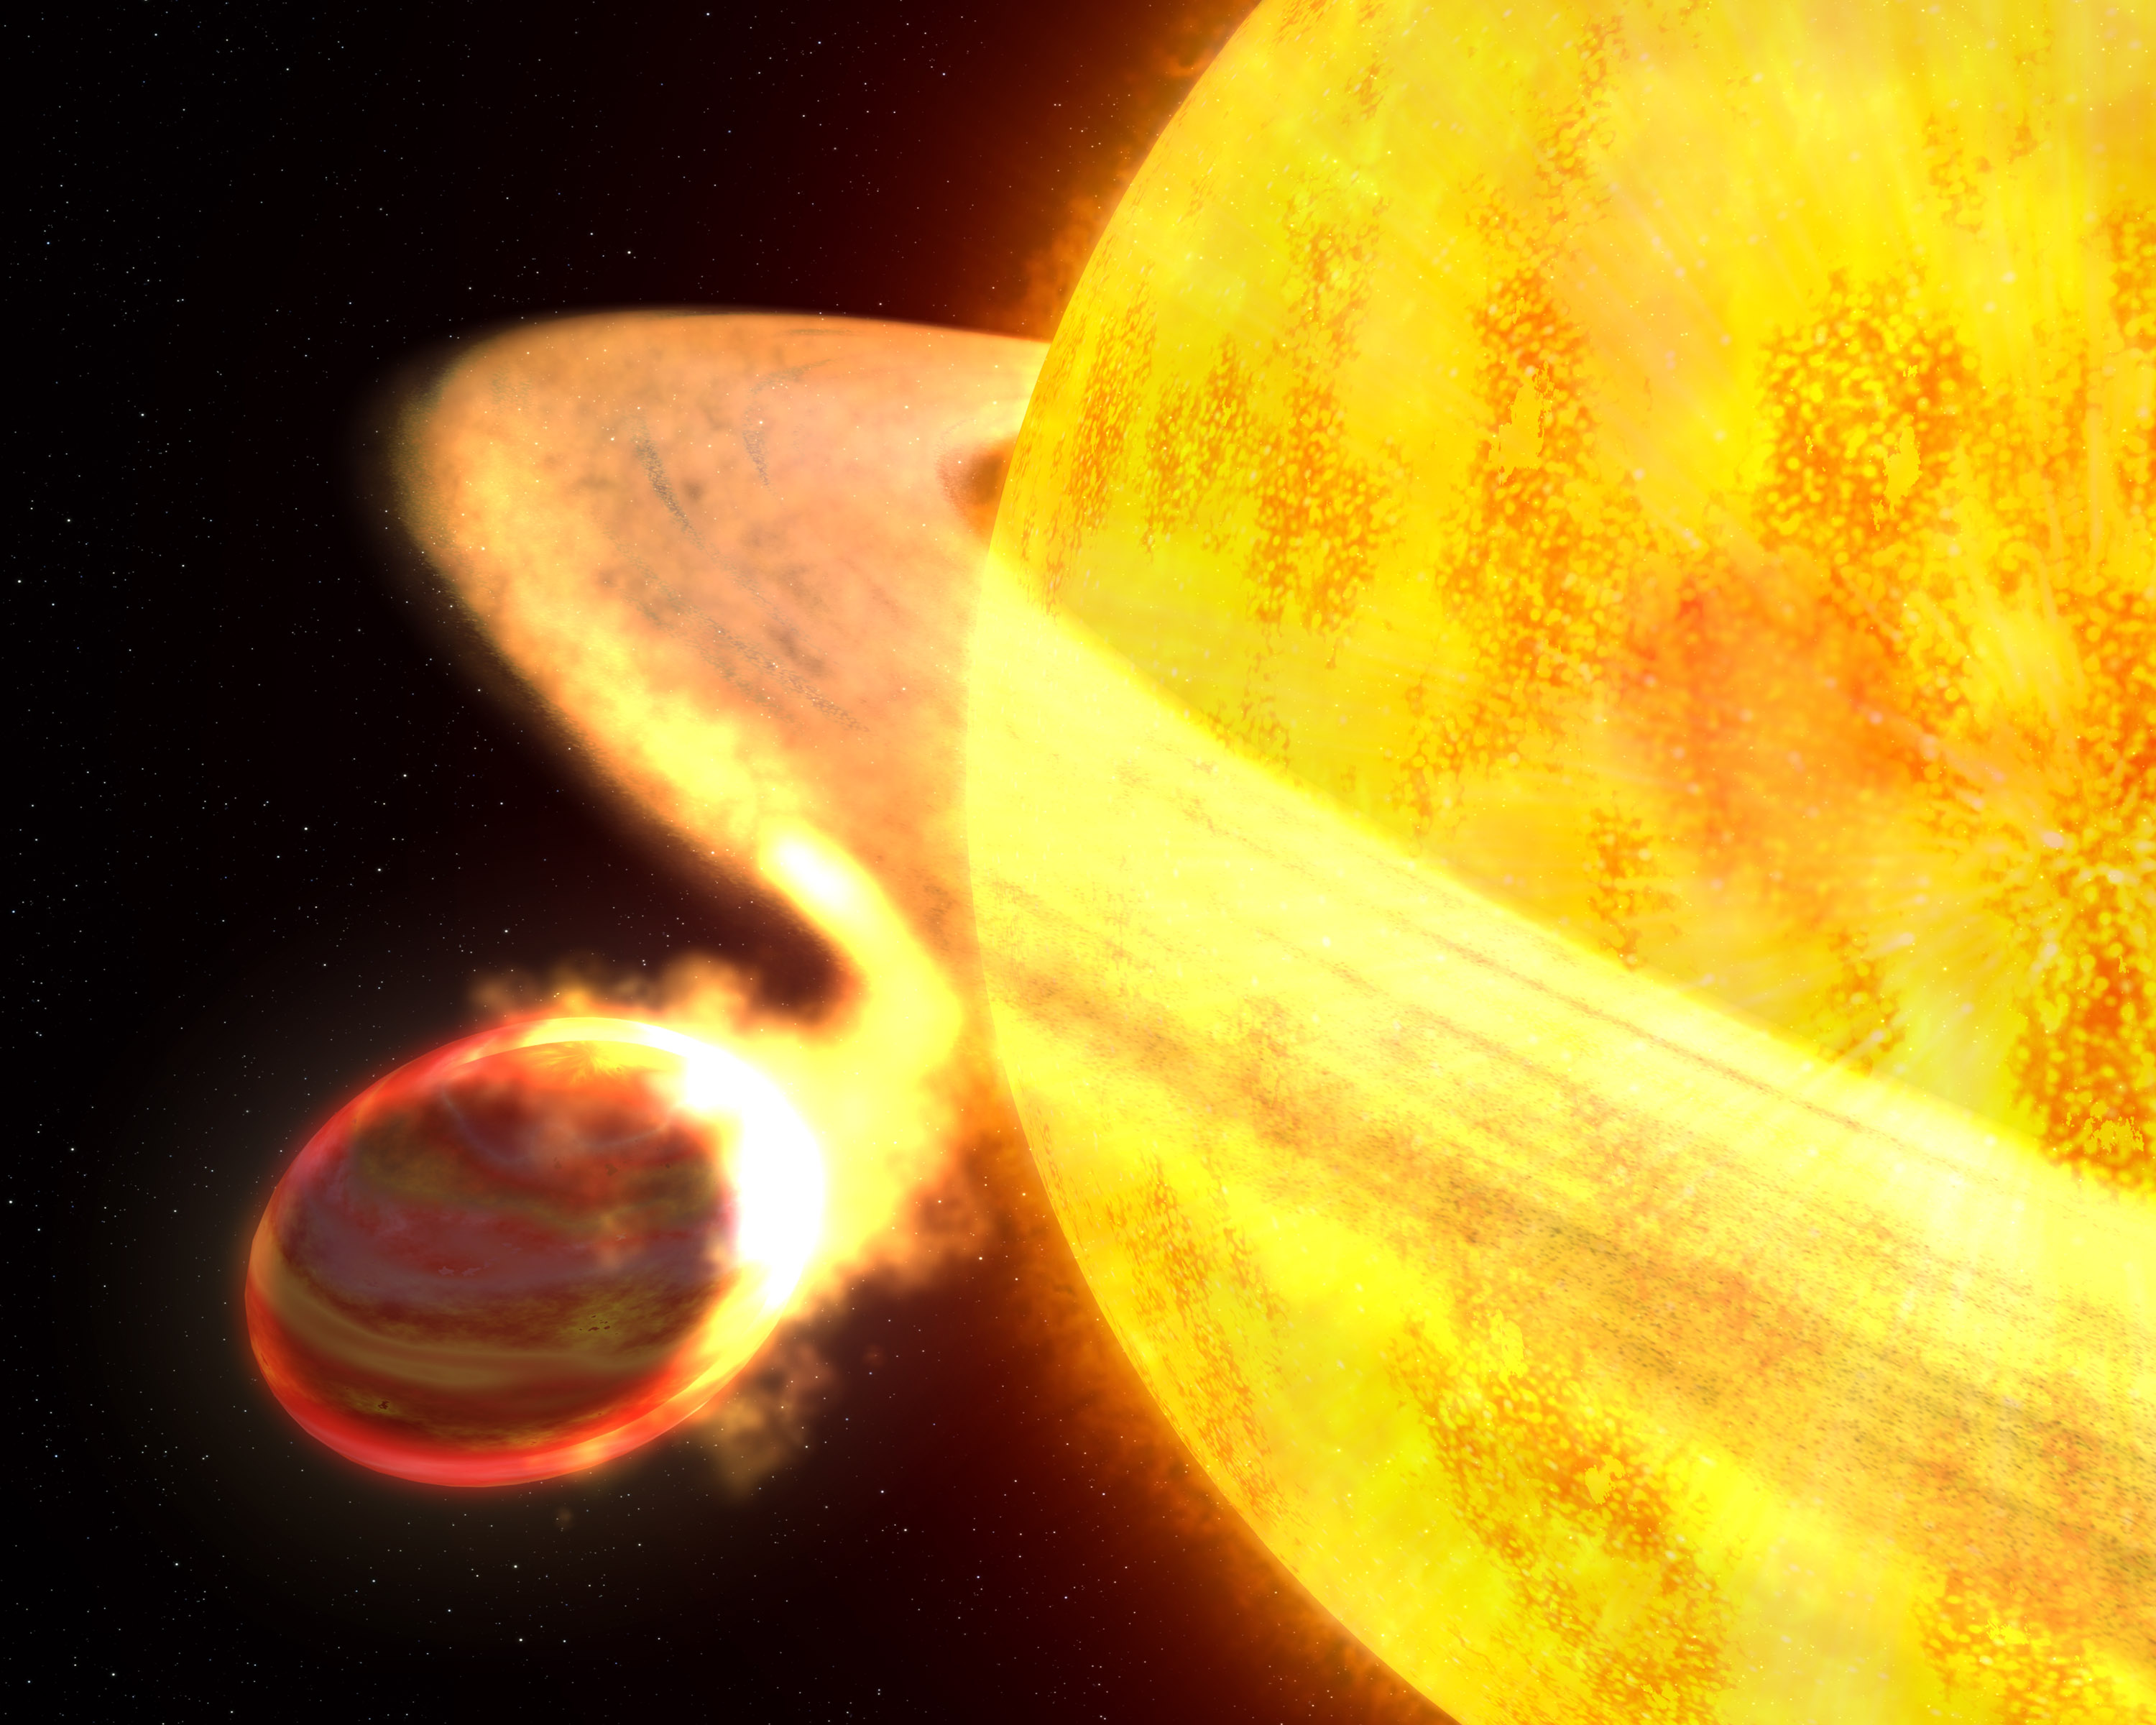 The planet that is getting eaten up (WASP-12b)